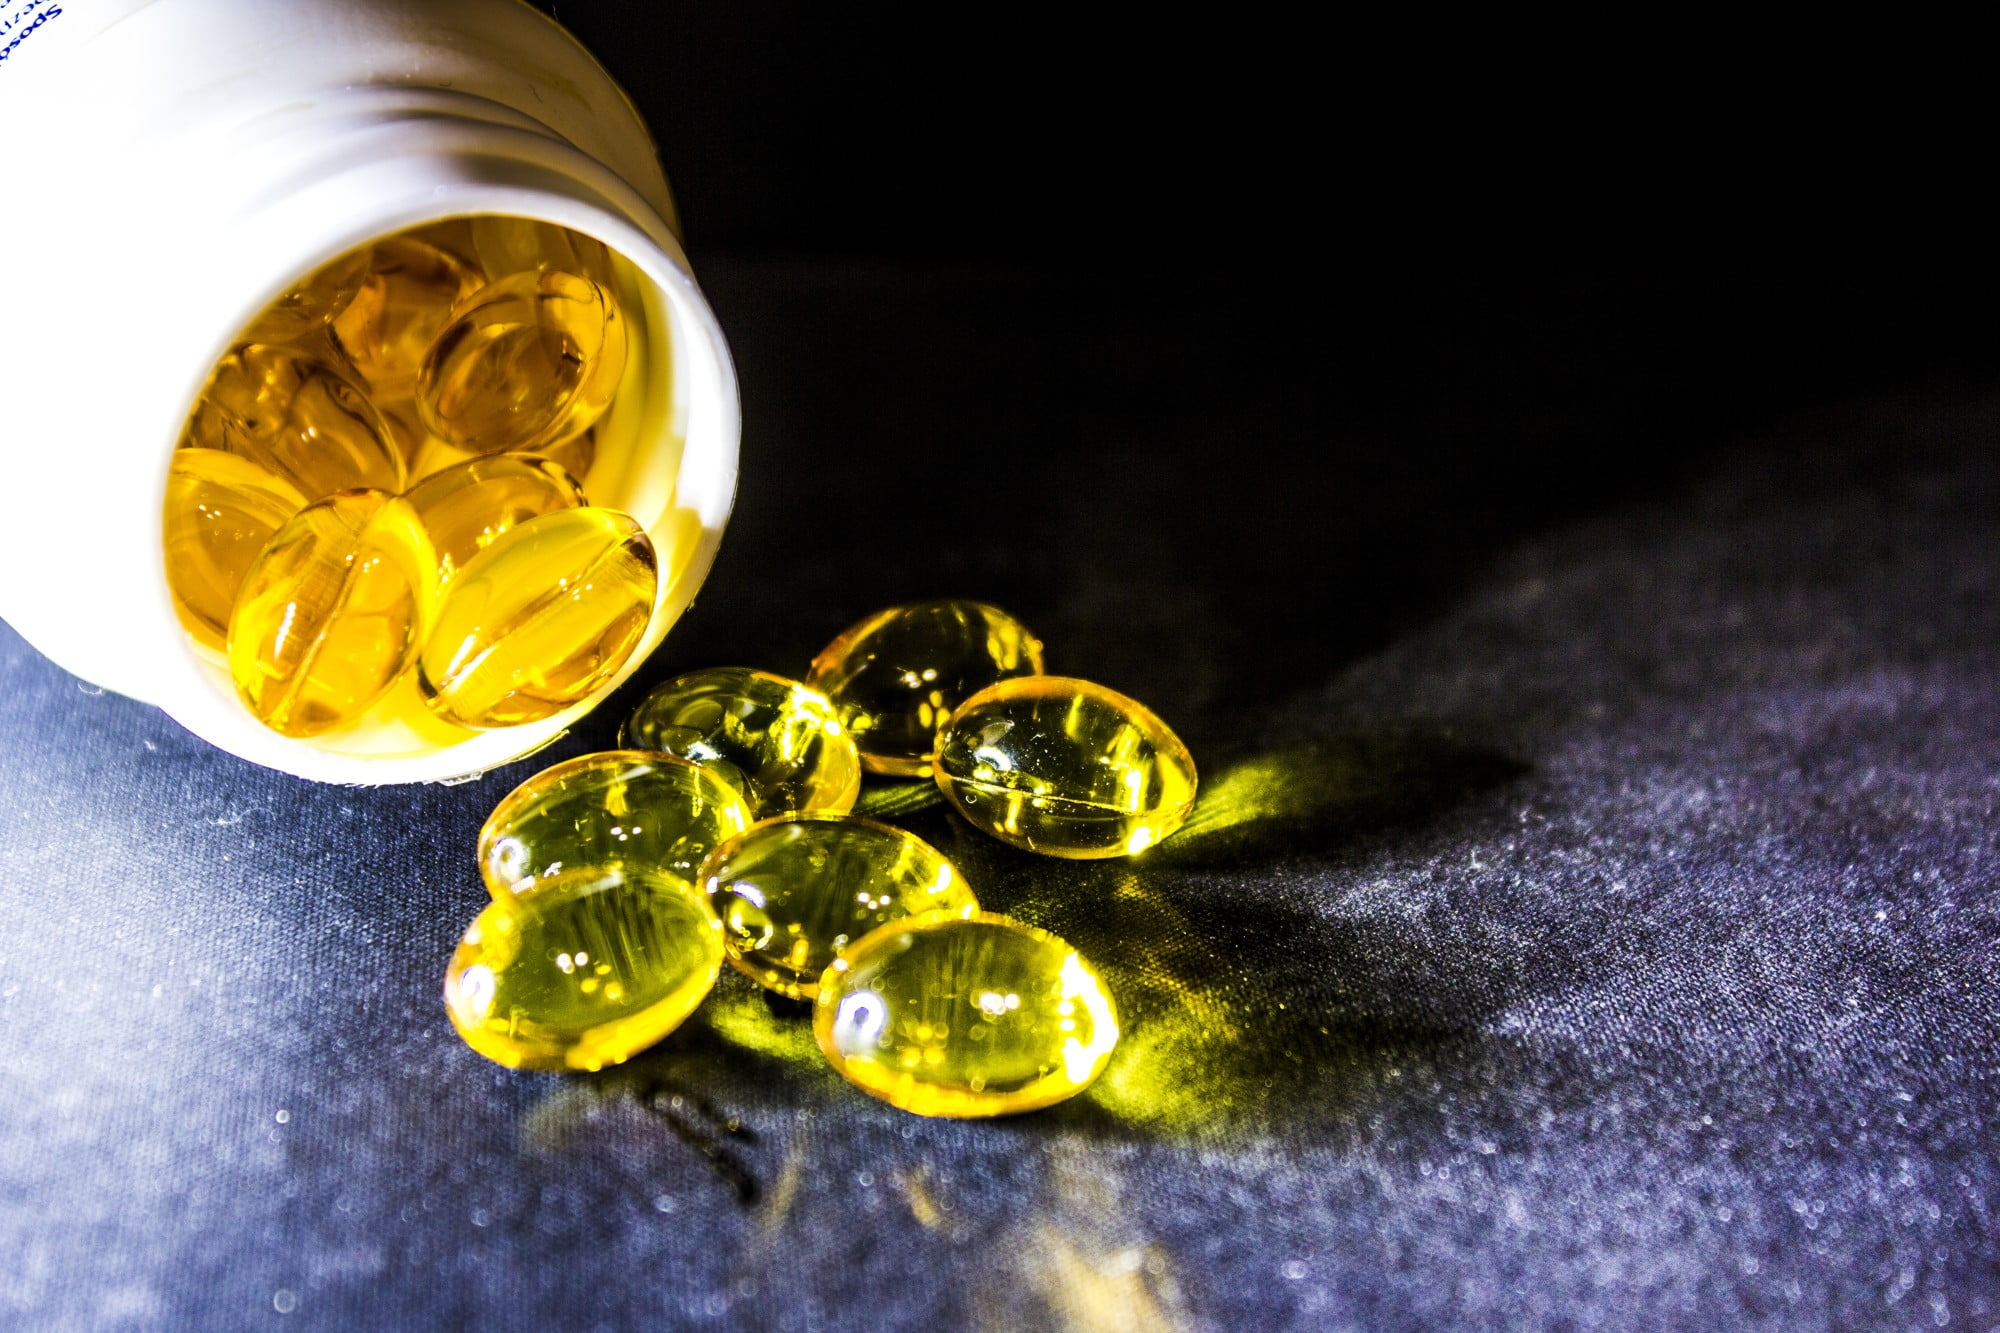 Omega 3 is critical for your overall health and wellbeing. Read on too learn about the signs and symptoms of omega 3 deficiency that you should never ignore.